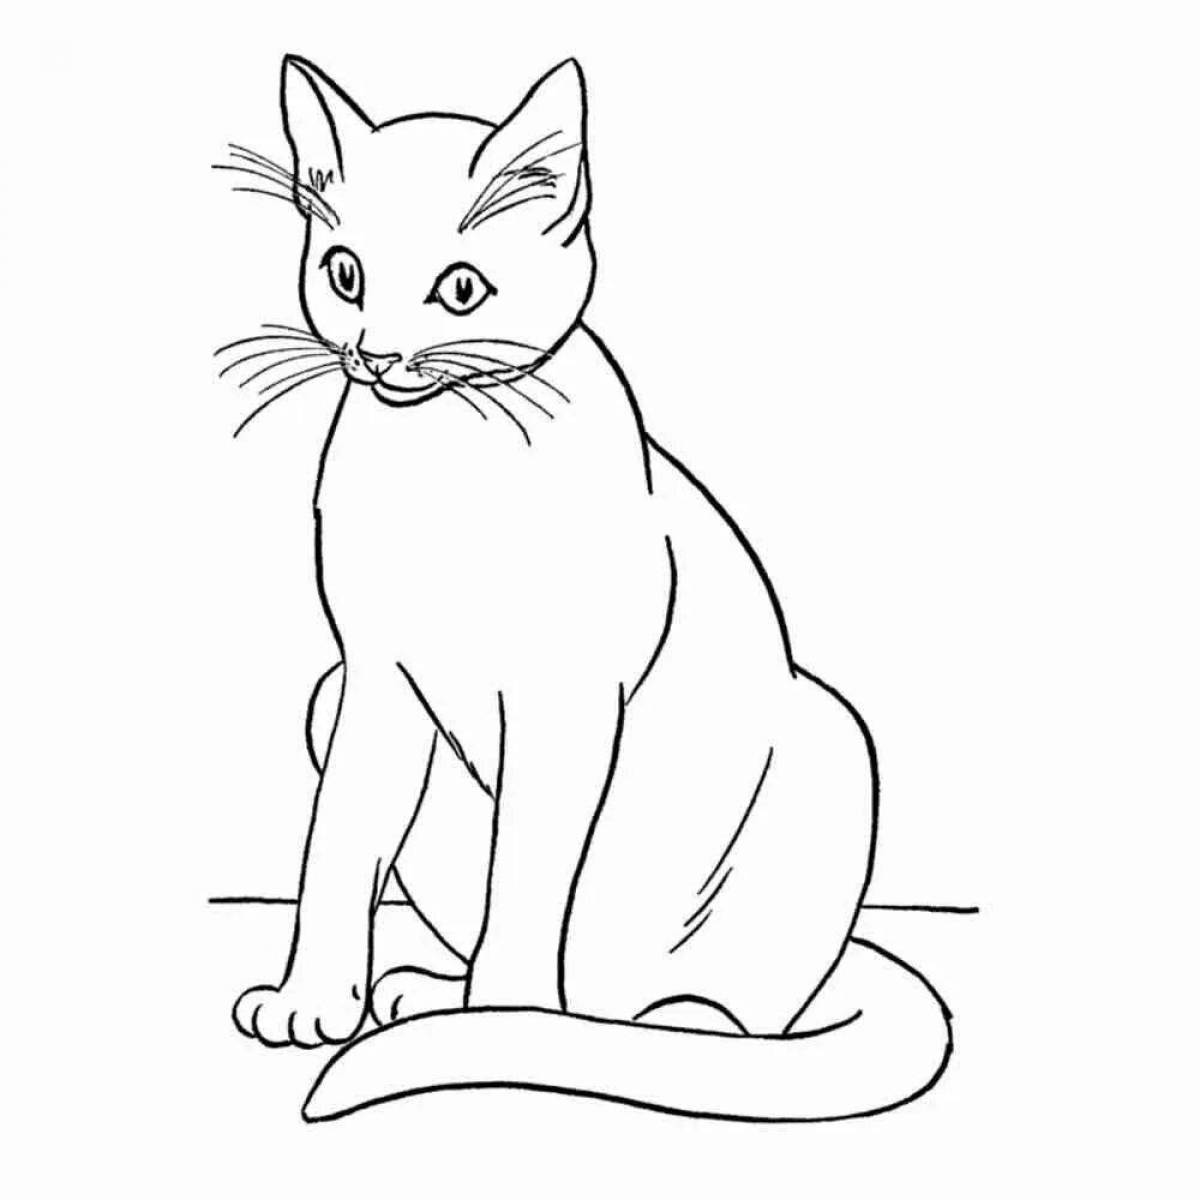 Coloring book happy sitting cat